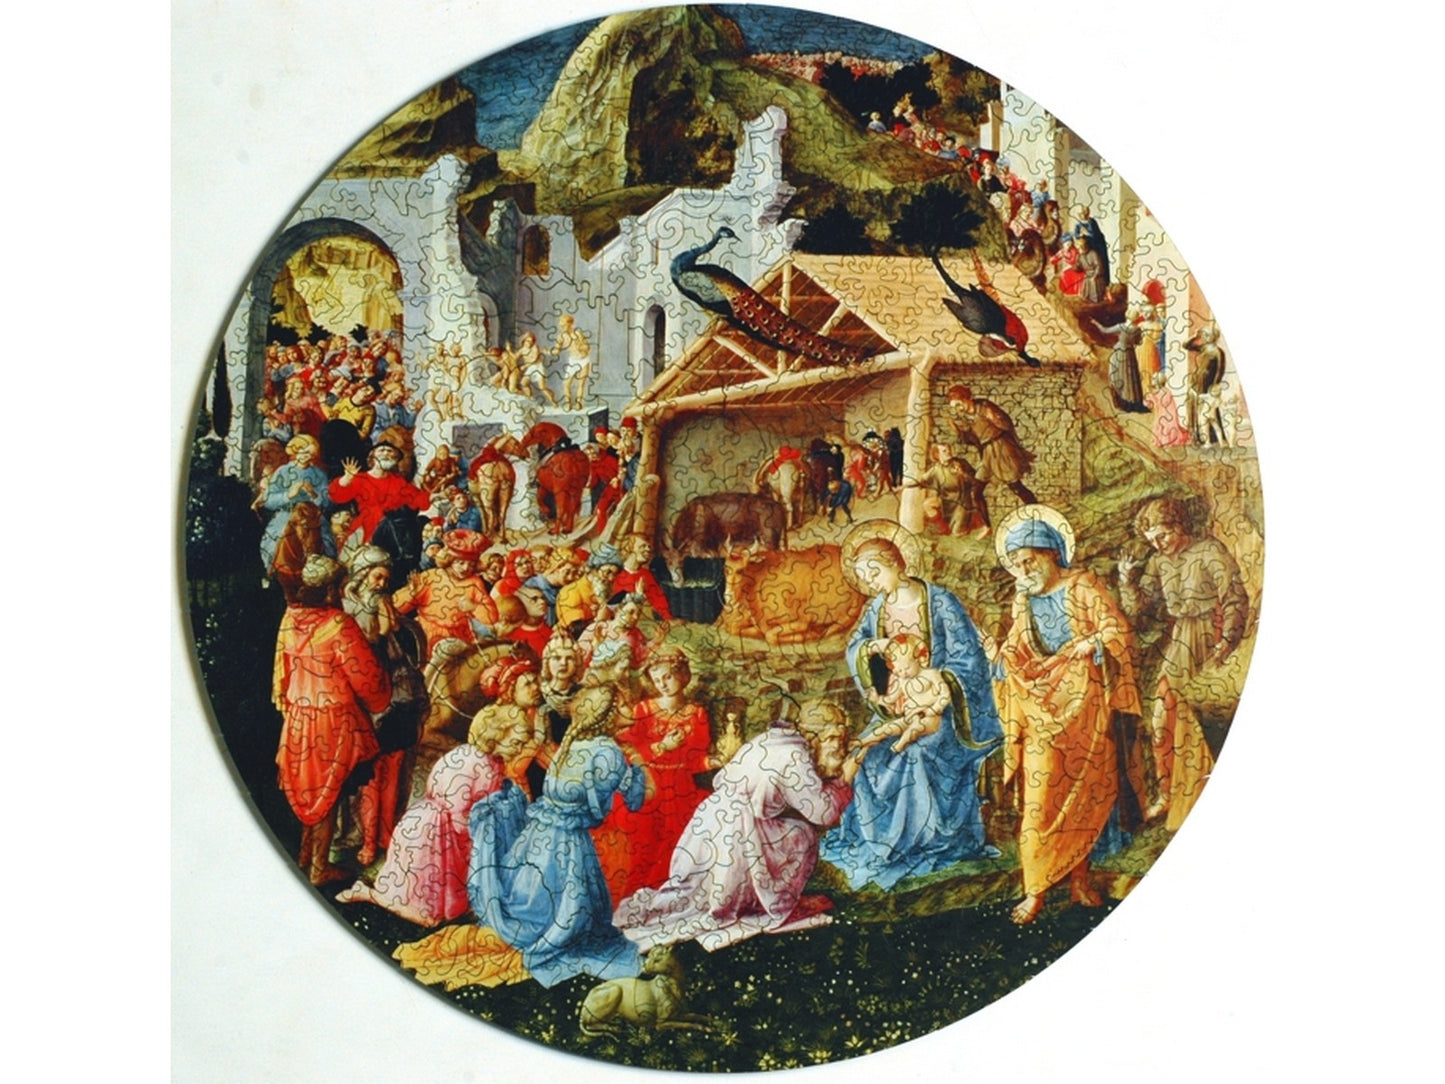 The front of the puzzle, Adoration of the Magi, which shows people waiting in line to meet Baby Jesus.